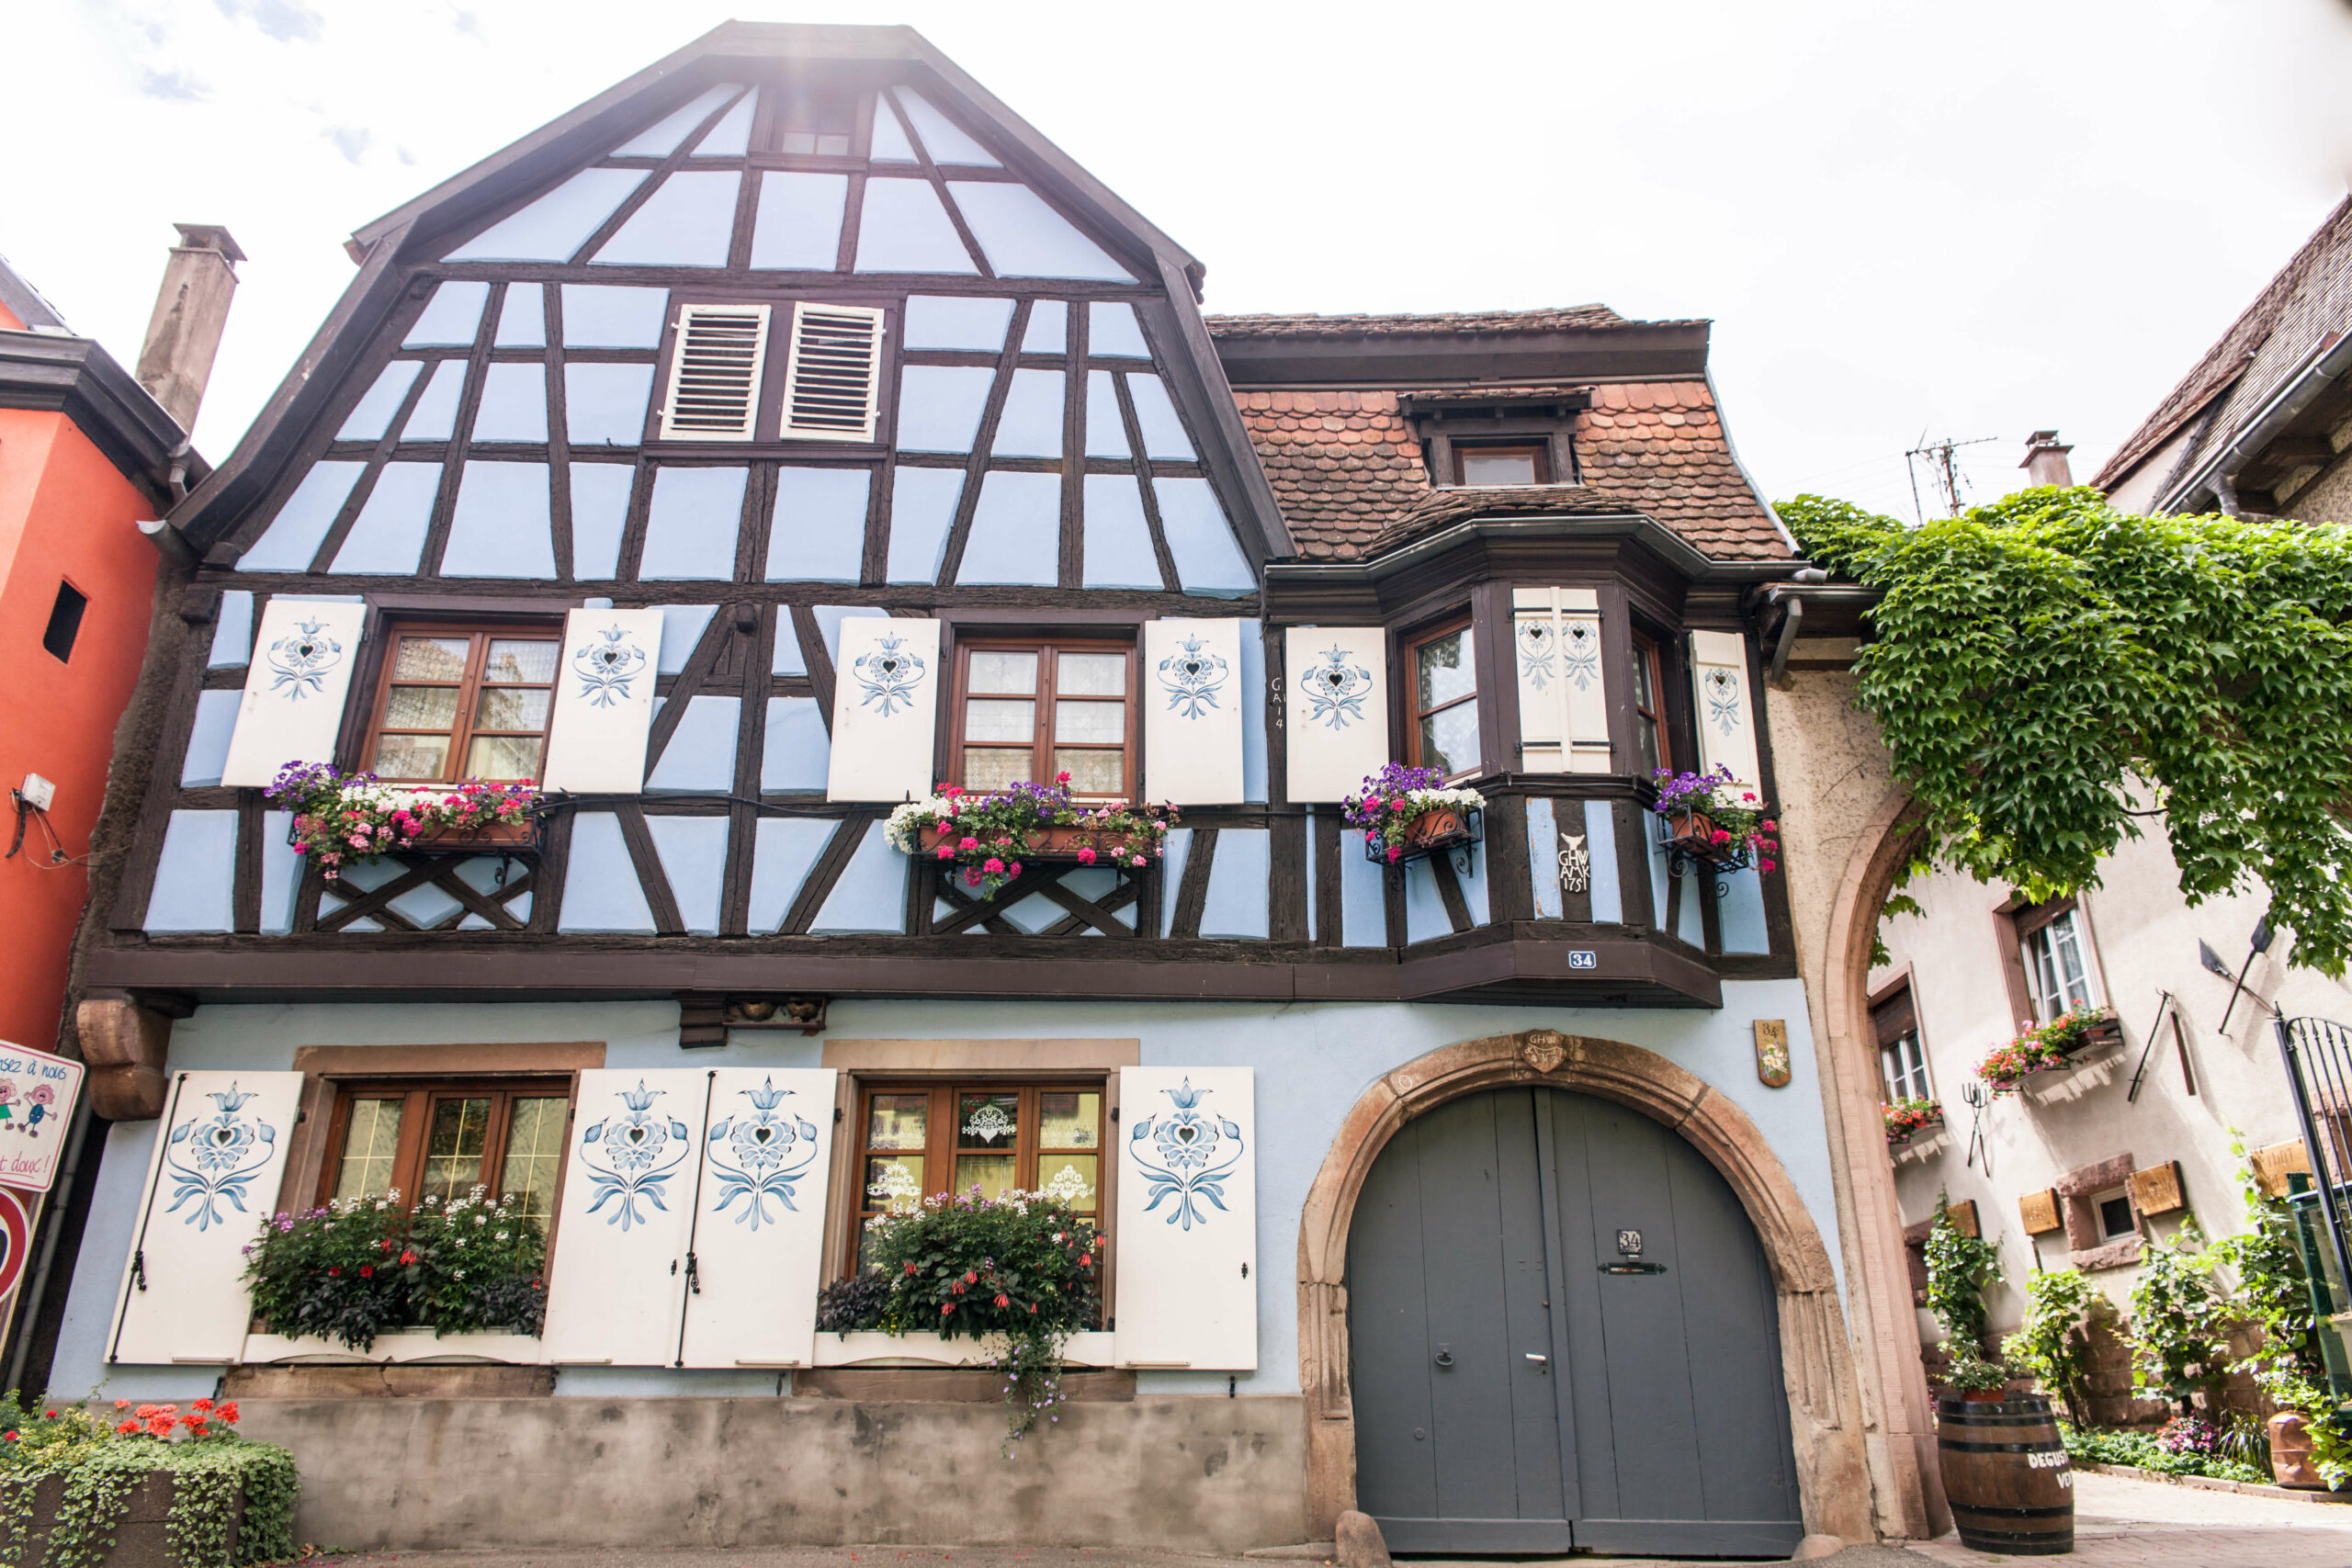 Alsace France Wine Route - Nowhere & Everywhere - Sustainable travel Europe road trip